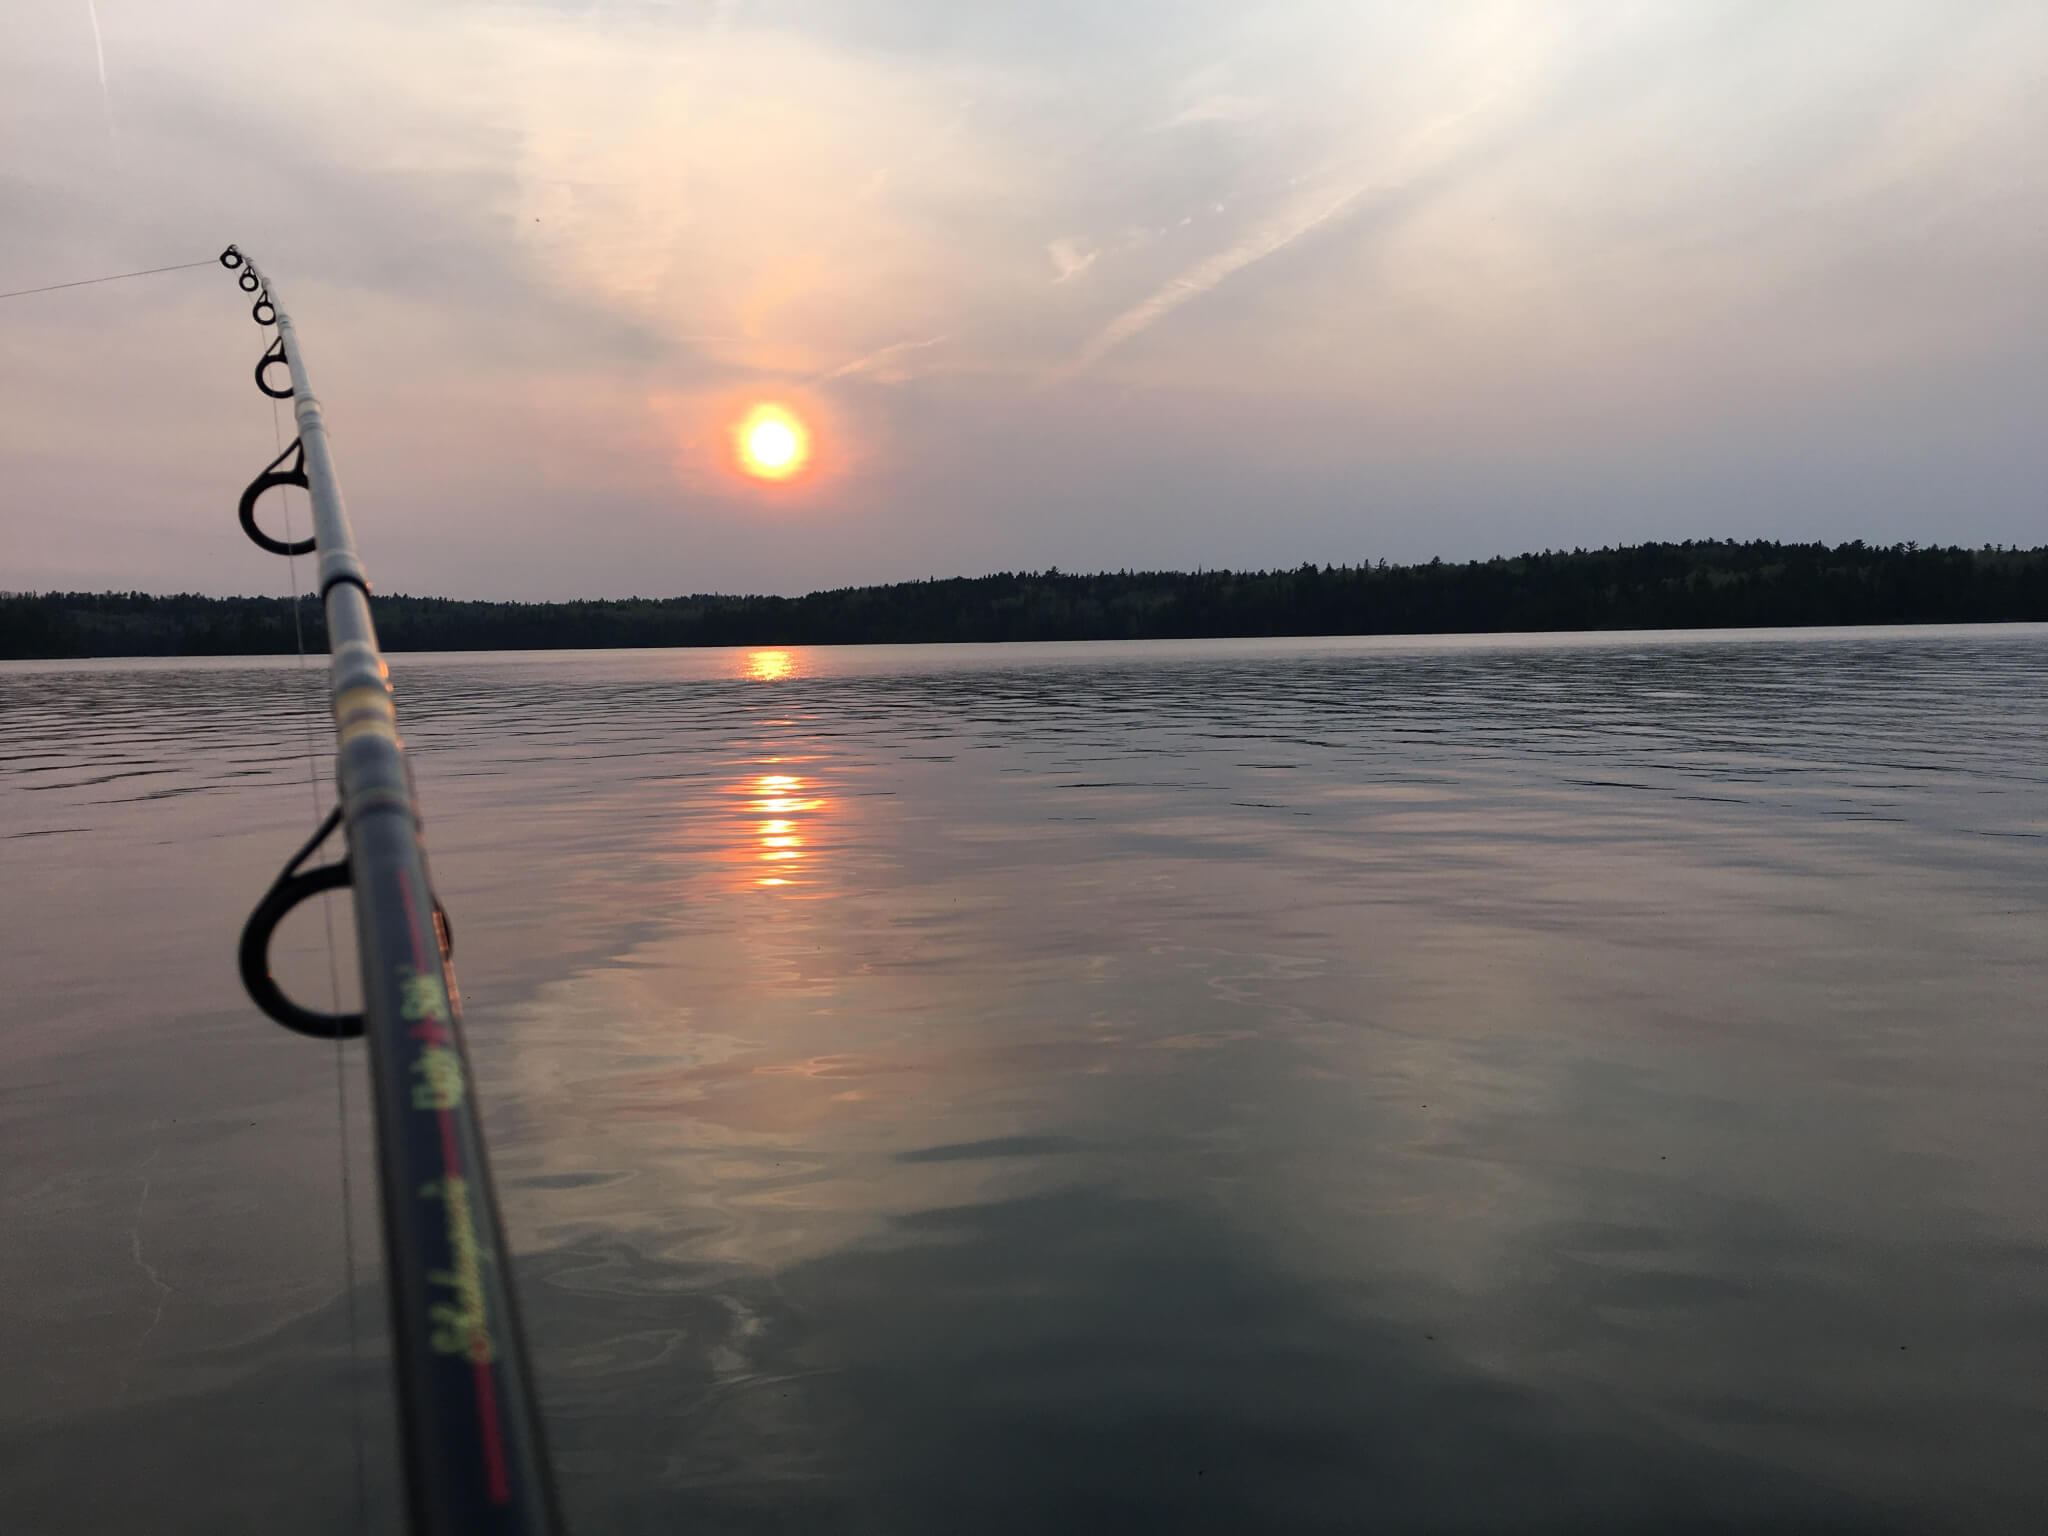 Fly-in remote fishing camp - A quiet oasis getaway in beautiful Northern Ontario Canada